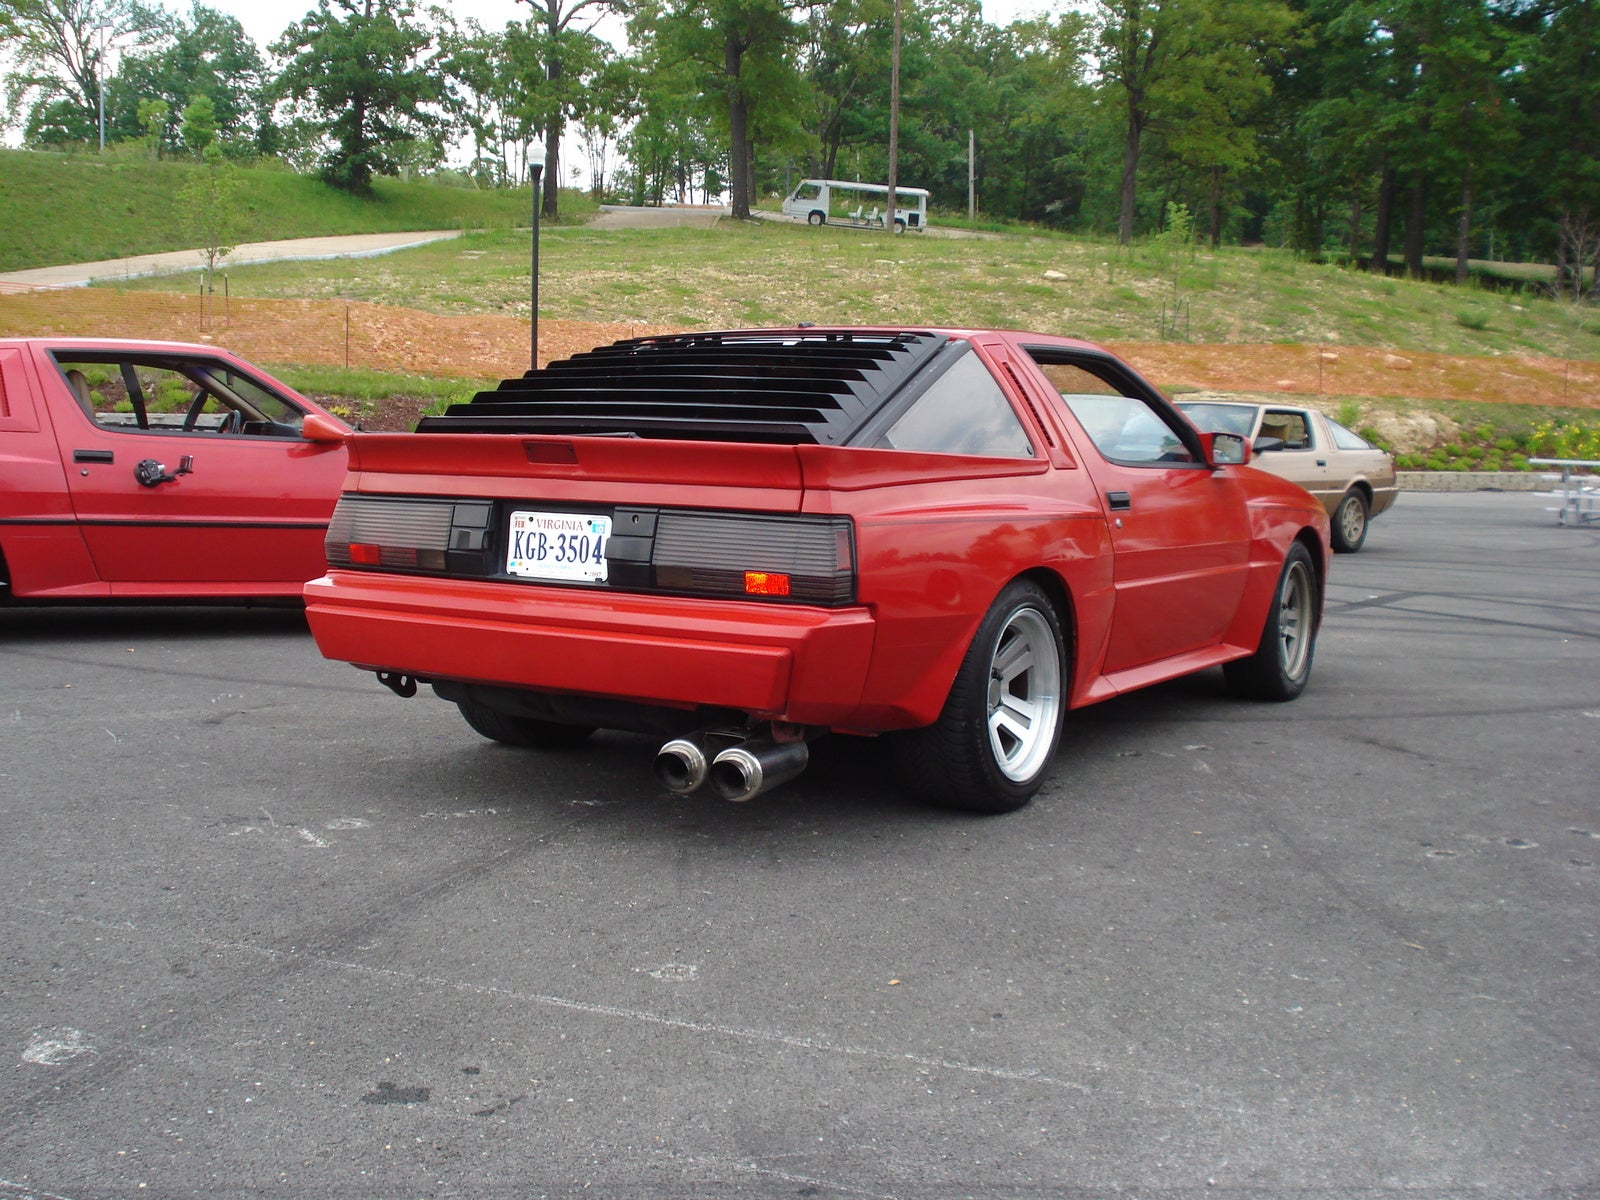 88 Chrysler conquest tsi for sale #2